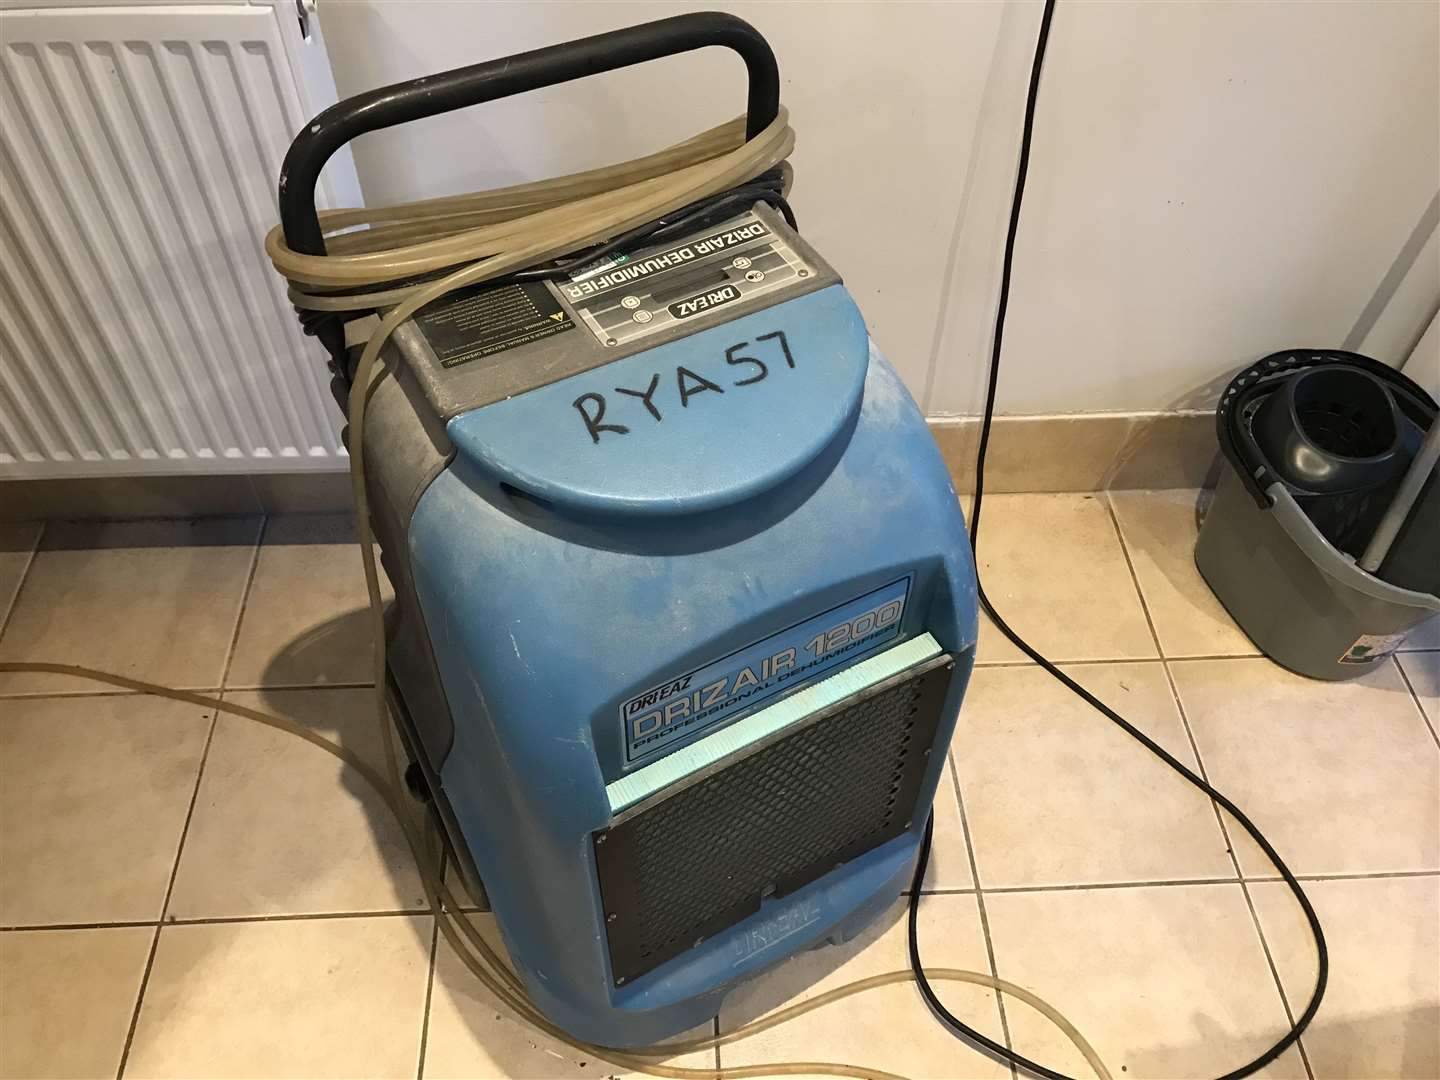 The dehumidifiers that work round the clock in the flat to tackle the damp